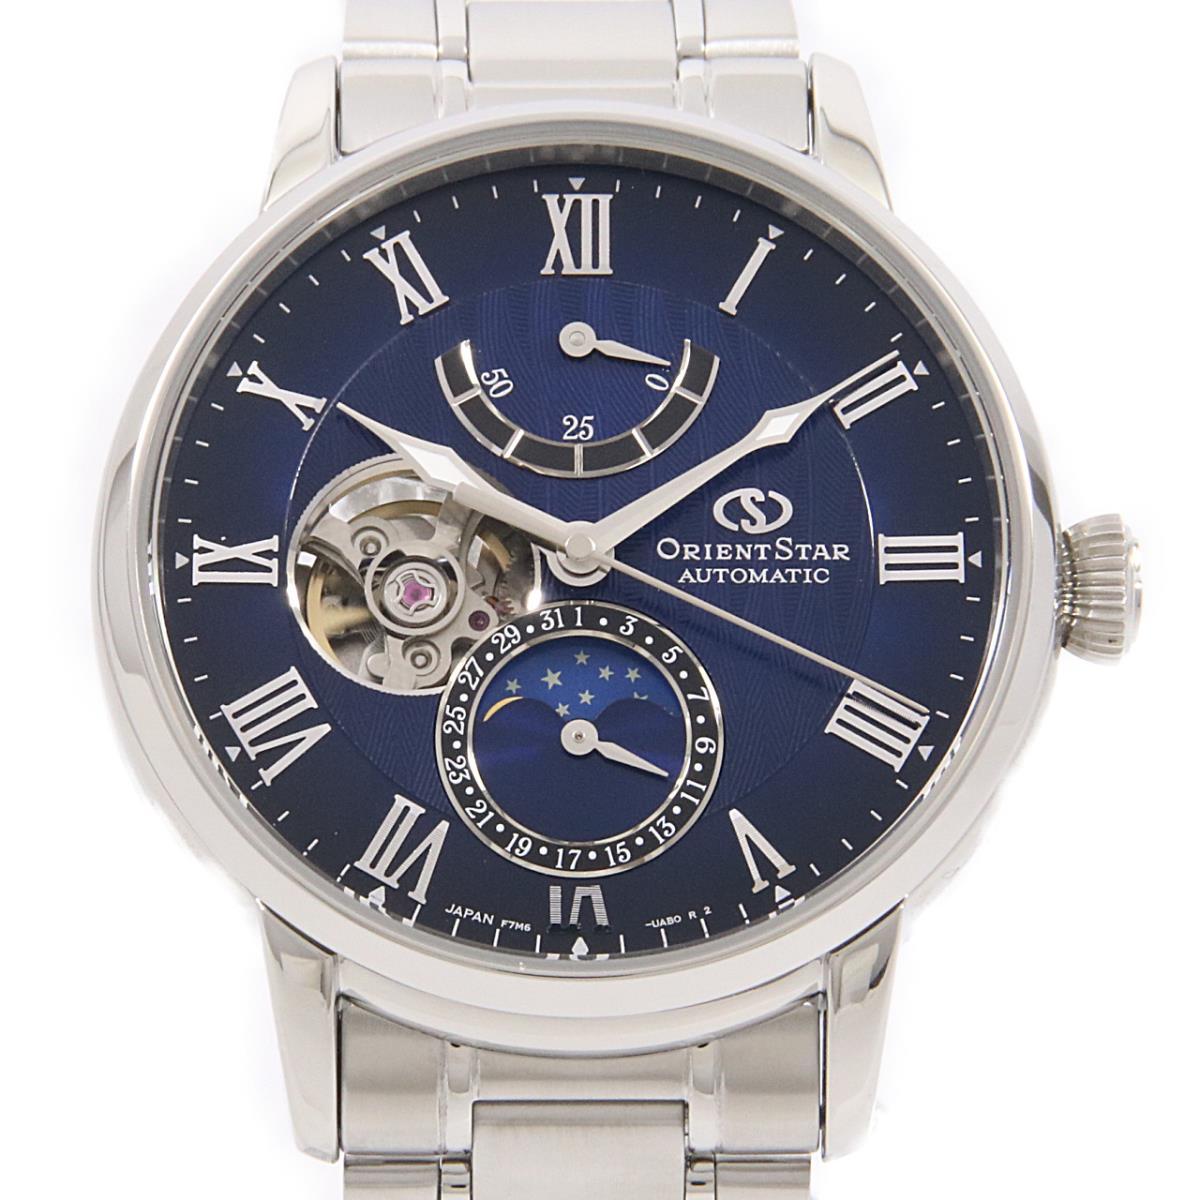 [BRAND NEW] ORIENT STAR F7M6-UAB0/RK-AY0103L Mechanical Moon Phase Automatic